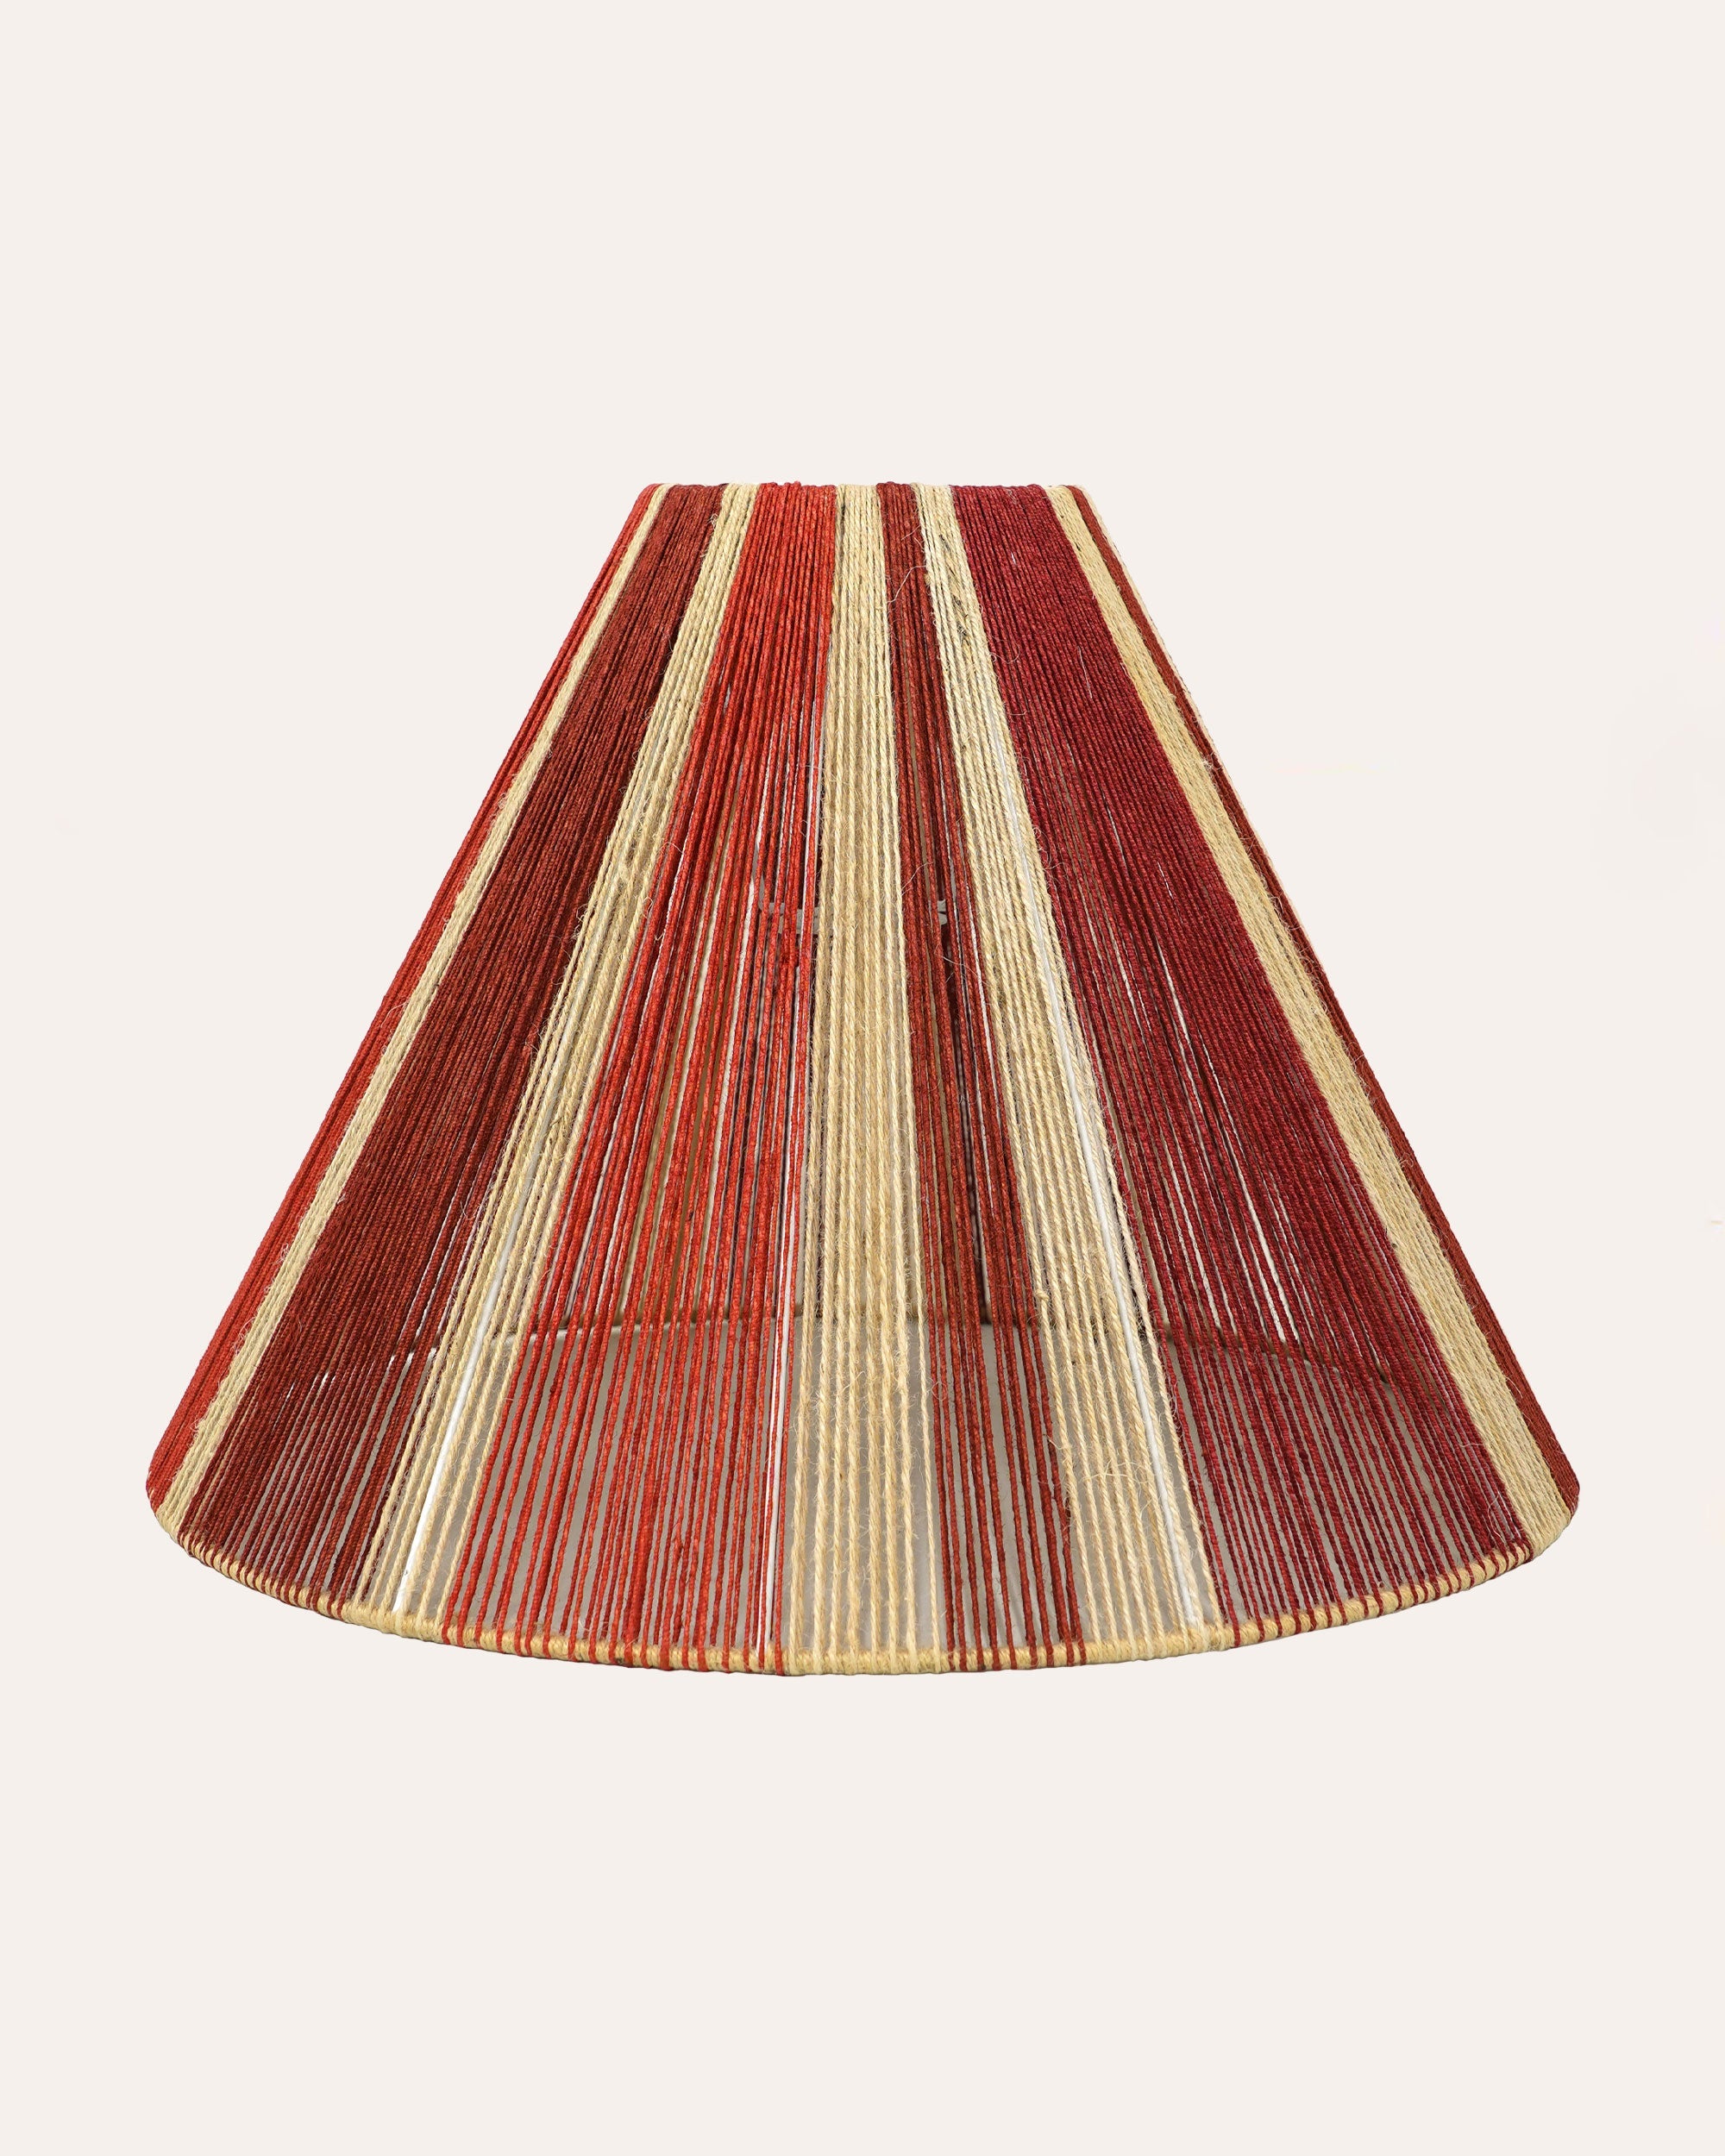 The Stripey Pendant Shade - The Red